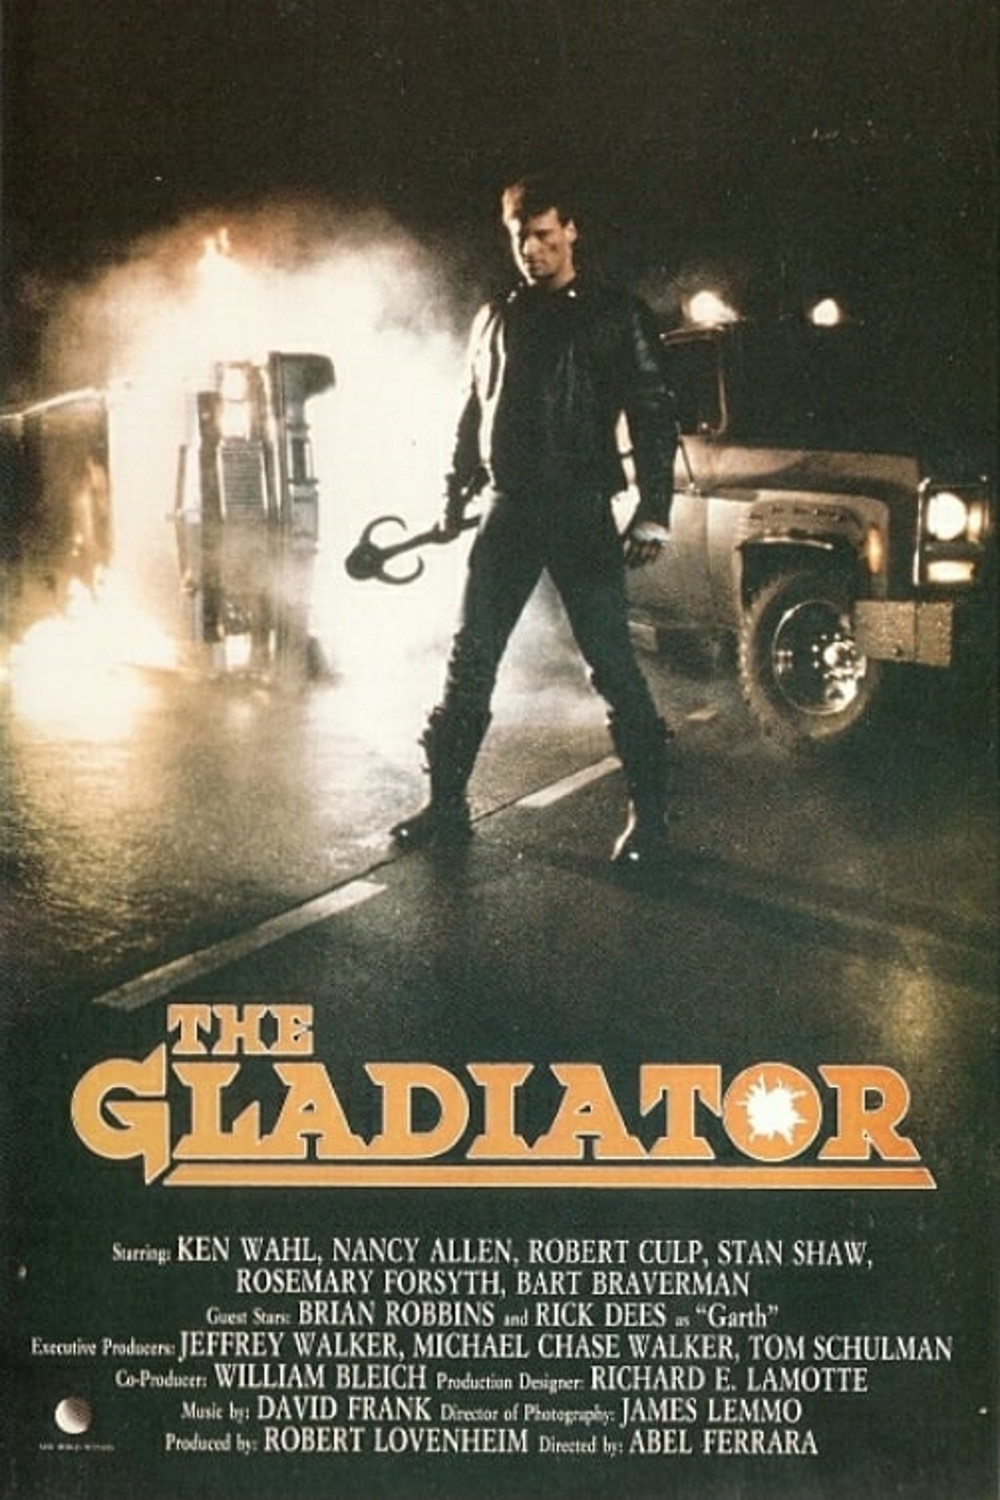 The Gladiator (1986) Poster